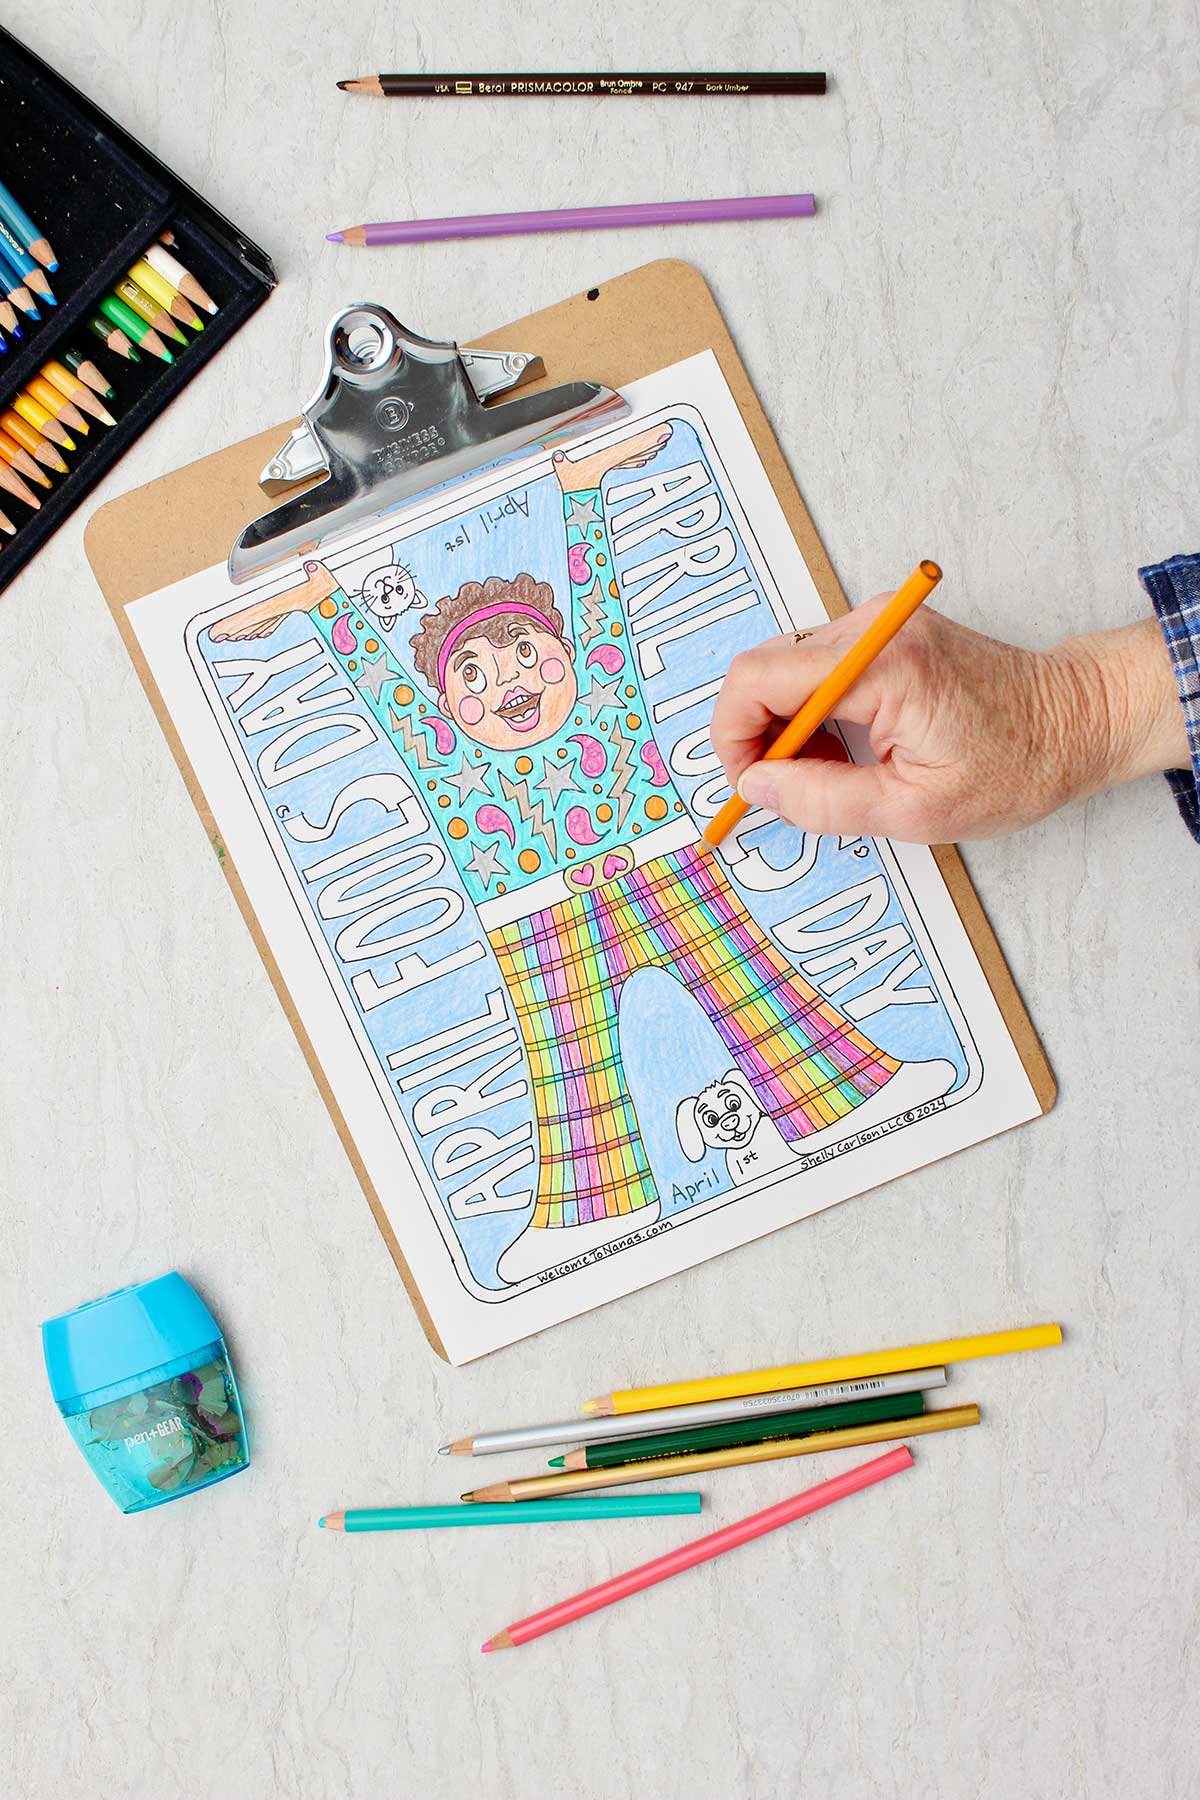 Hand coloring details in pants orange in April Fools Coloring Page clipped in clip board with colored pencils around.